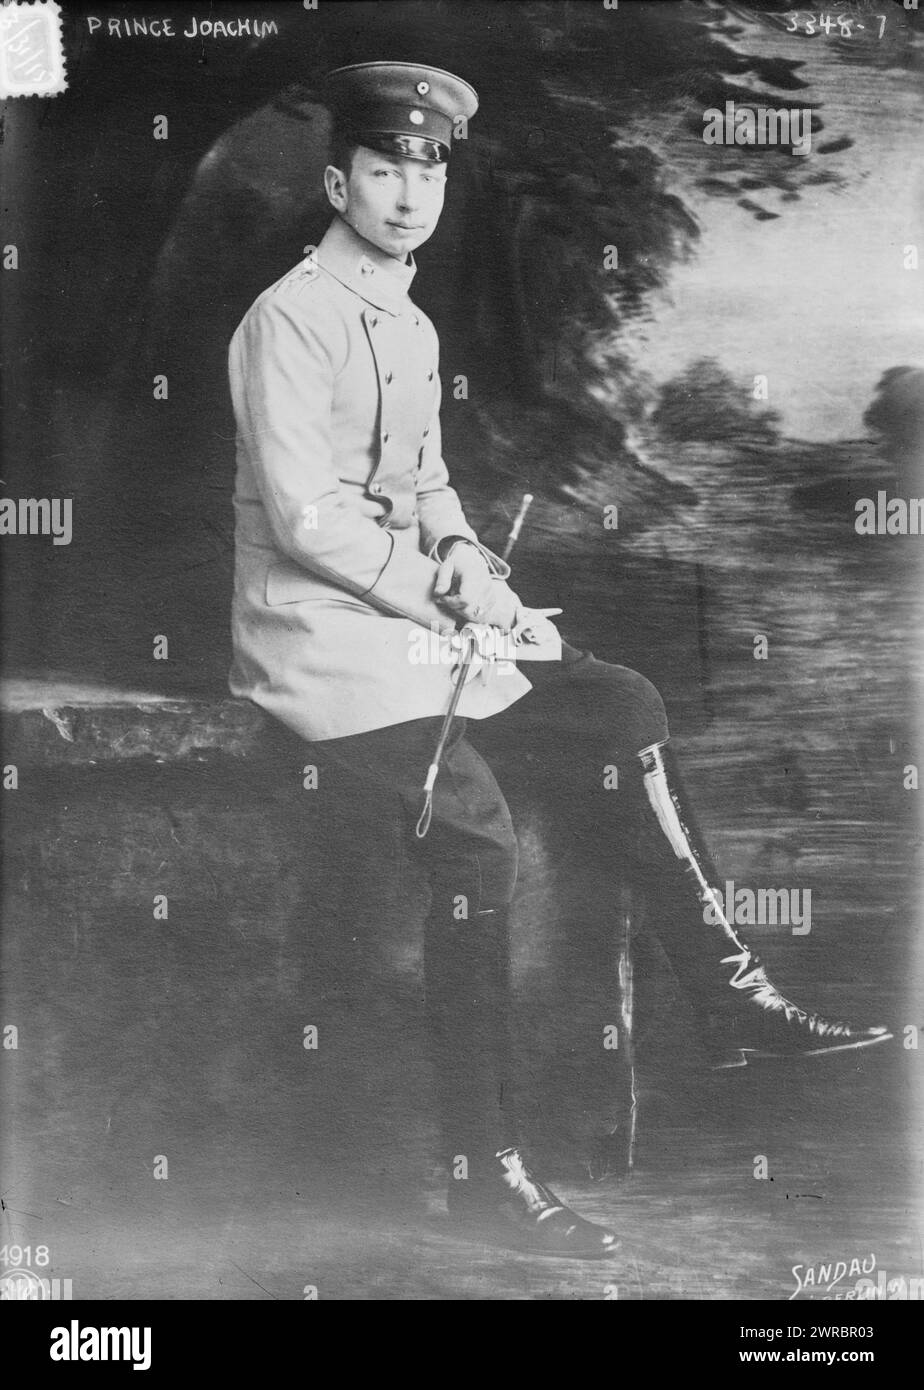 Prince Joachim, Photograph shows Prince Joachim Franz Humbert of Prussia (1890-1920), the youngest son of Wilhelm II, German Emperor., 1915 Jan. 26, Glass negatives, 1 negative: glass Stock Photo